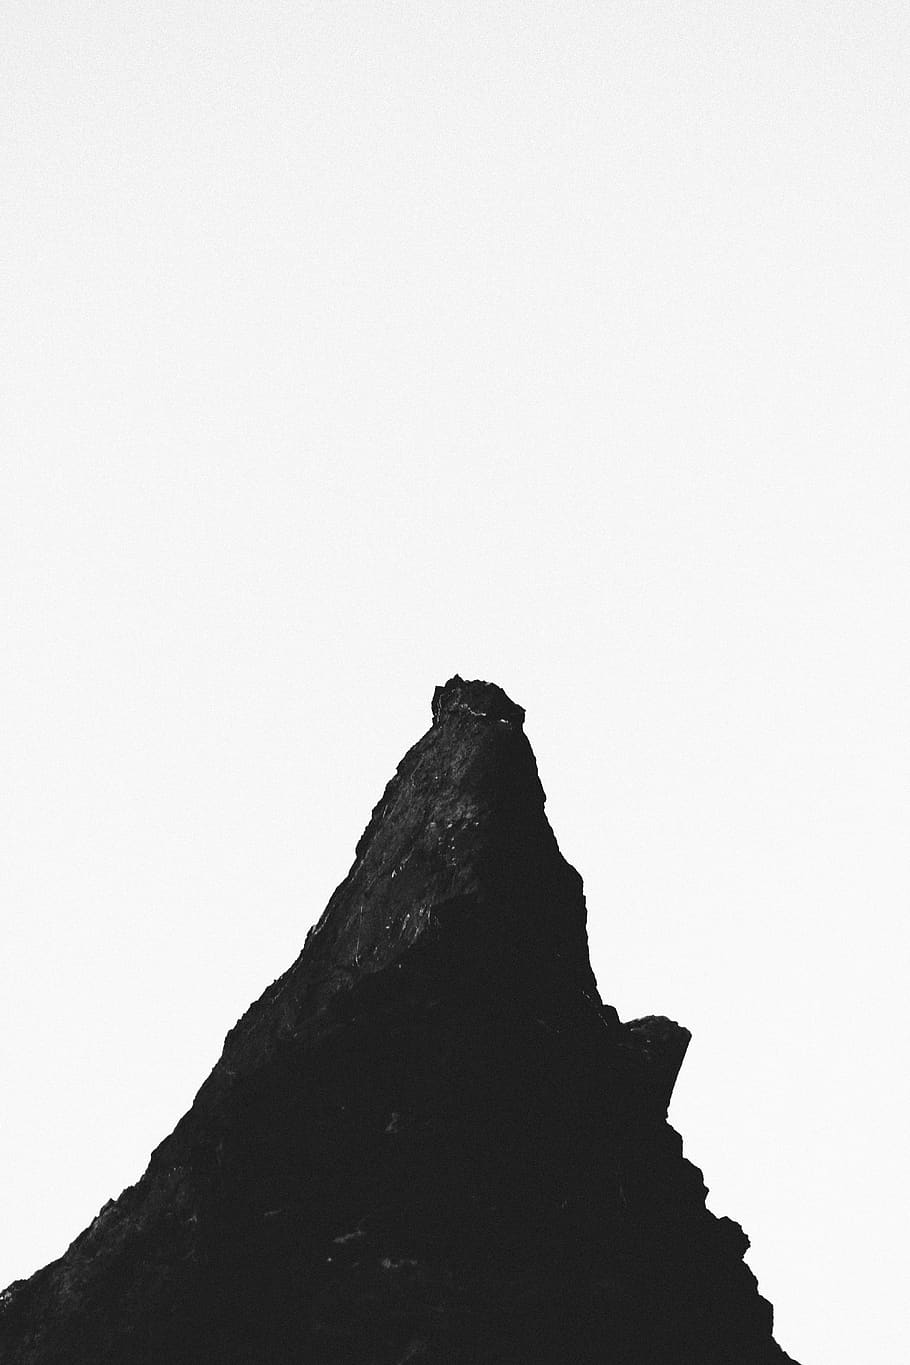 black ash on white background, cliff, nature, outdoors, silhouette